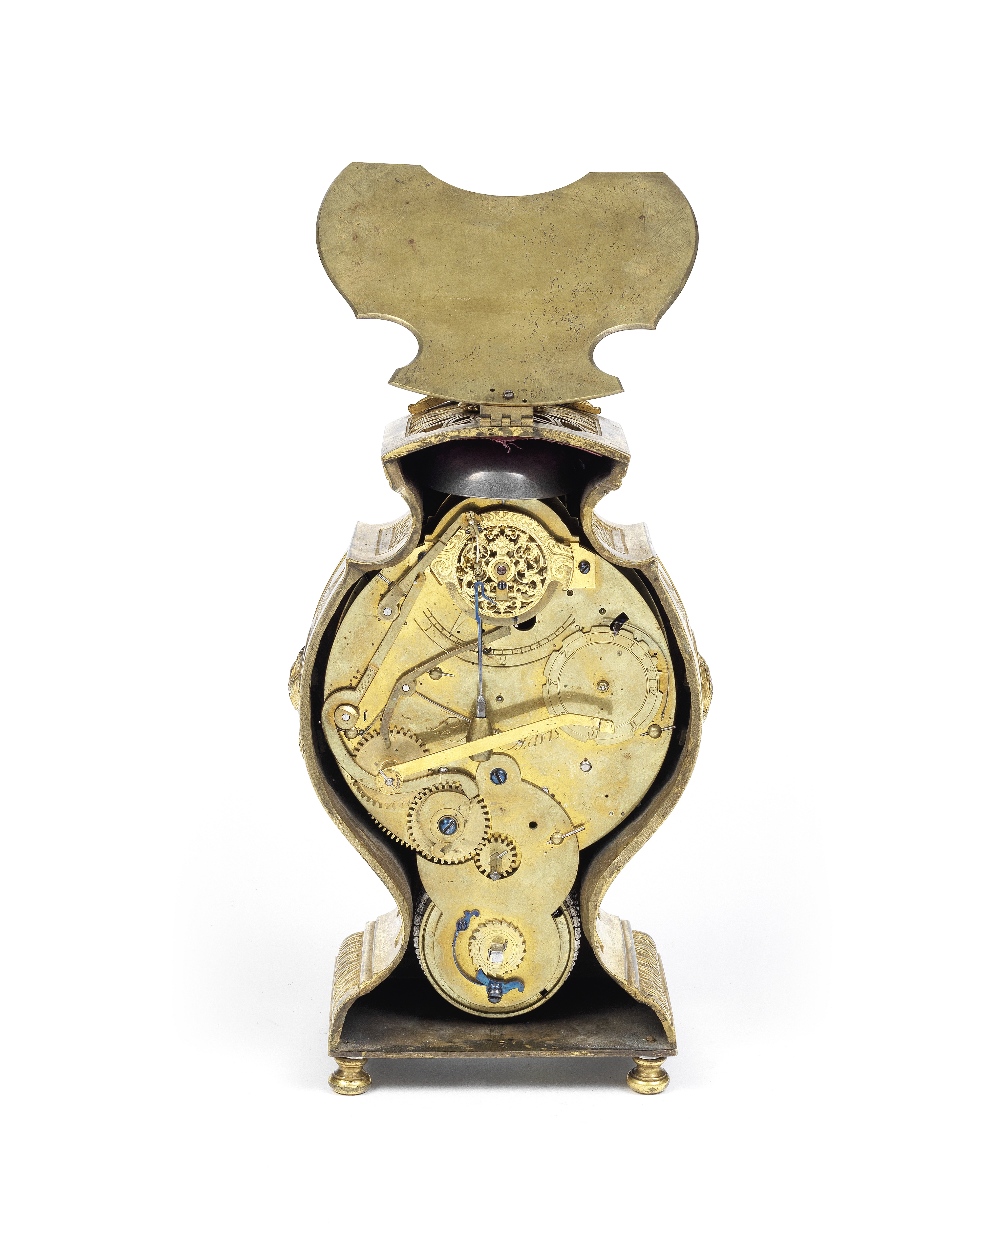 An exceptionally rare and very fine early 18th century French ormolu travelling clock with choice... - Image 4 of 5